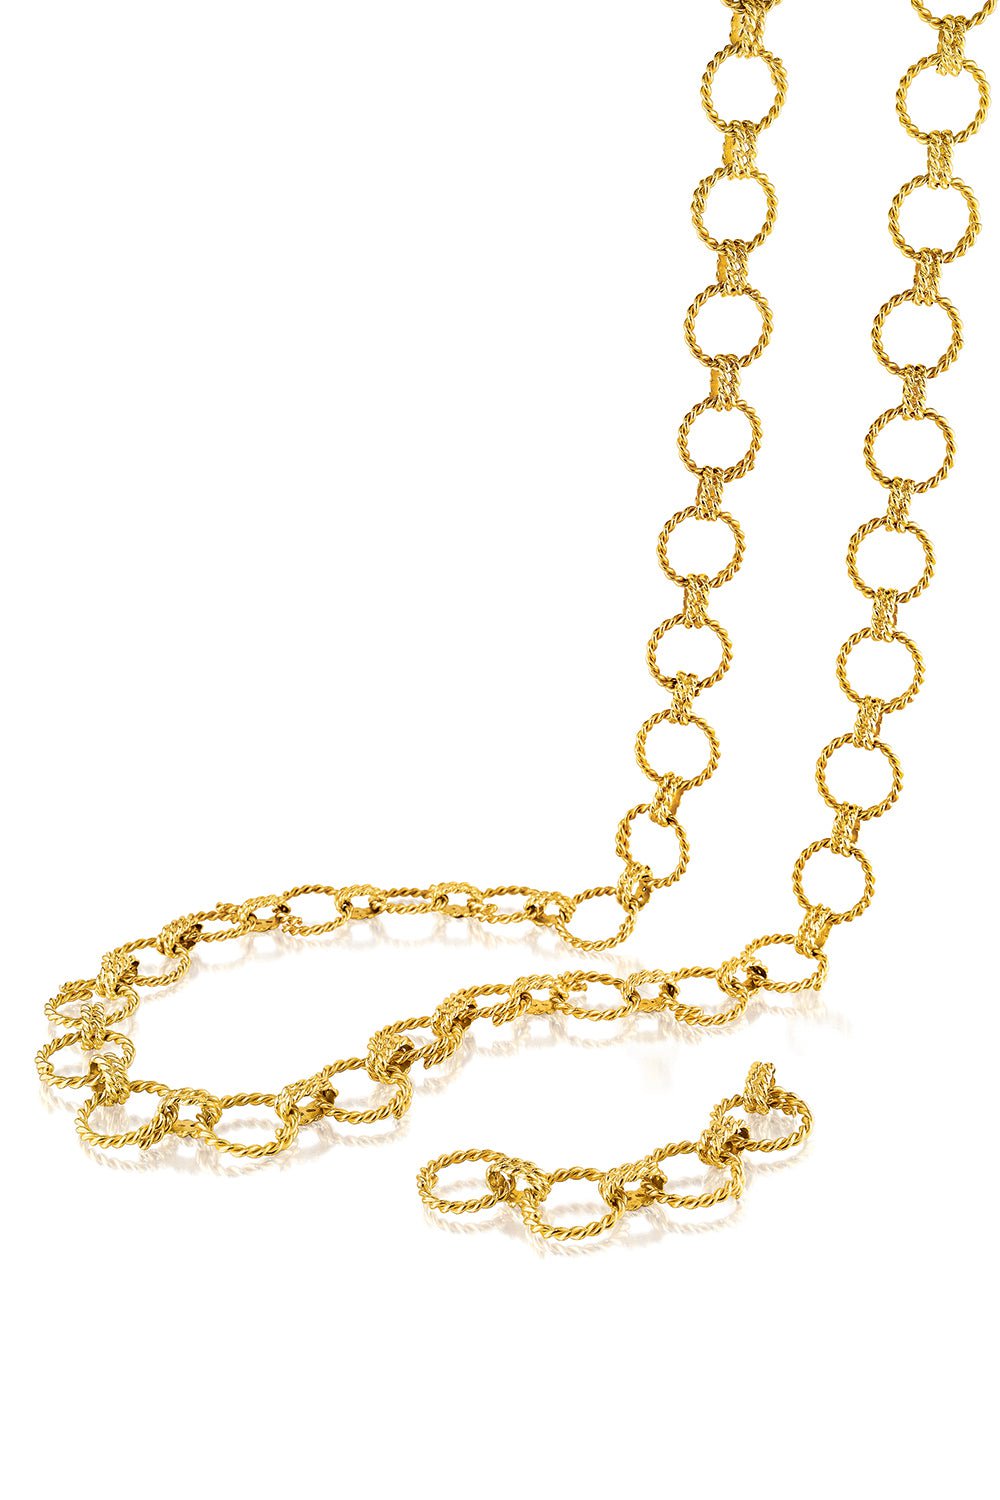 VERDURA-Circle Rope Link Necklace-YELLOW GOLD